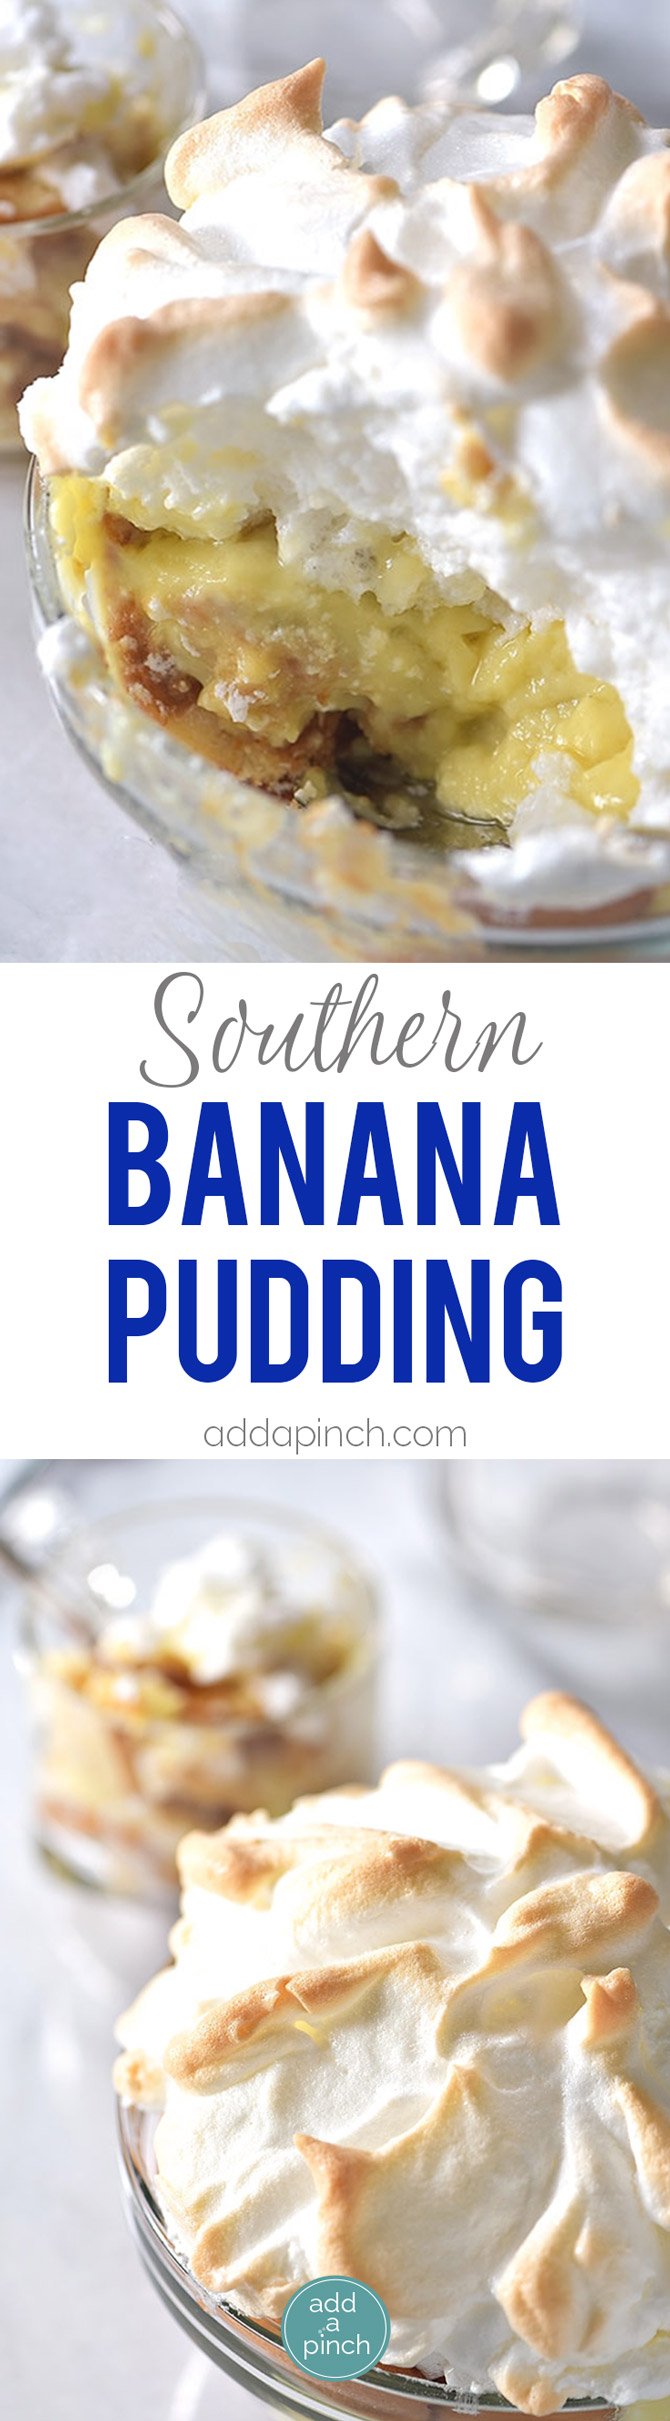 Images and text for easy pudding with bananas, nilla wafers, and meringue. // addapinch.com